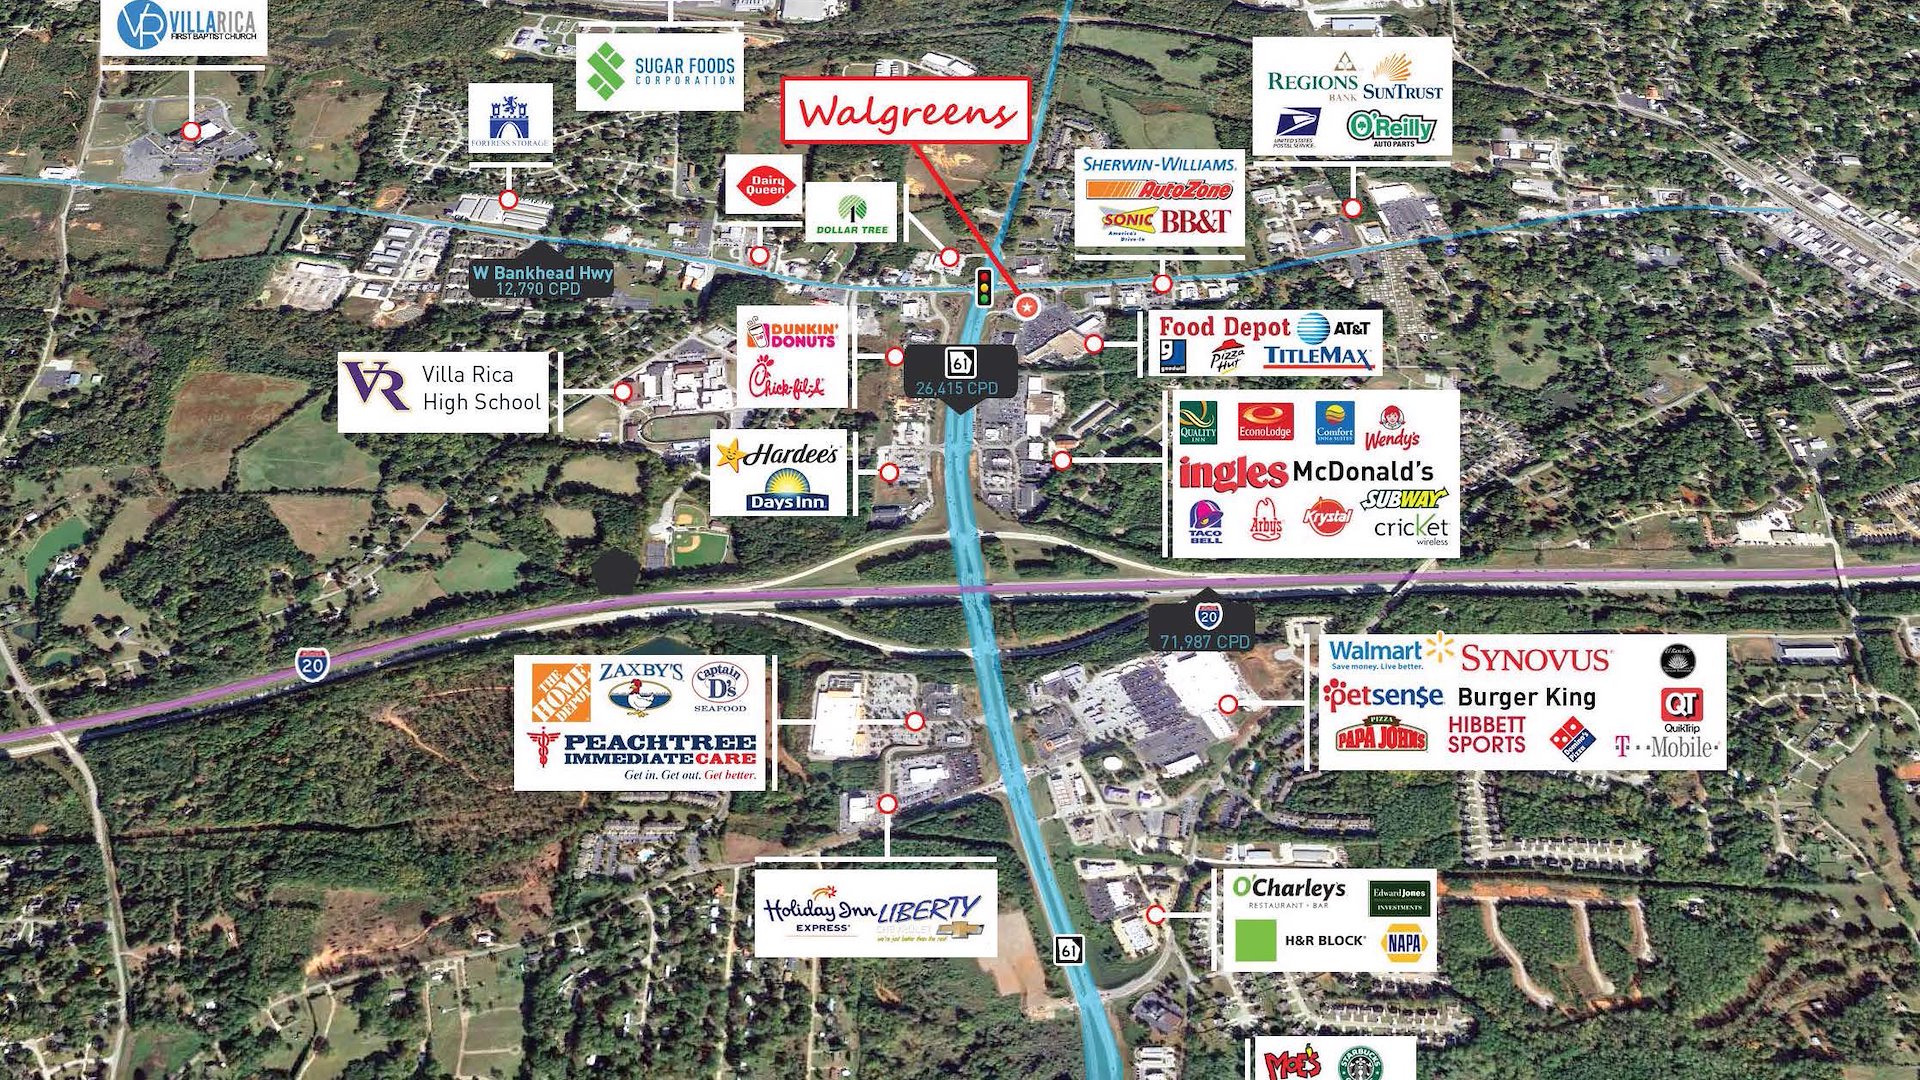 Walgreens | 4 Locations | Must be Purchased as a Portfolio/Villa Rica ...